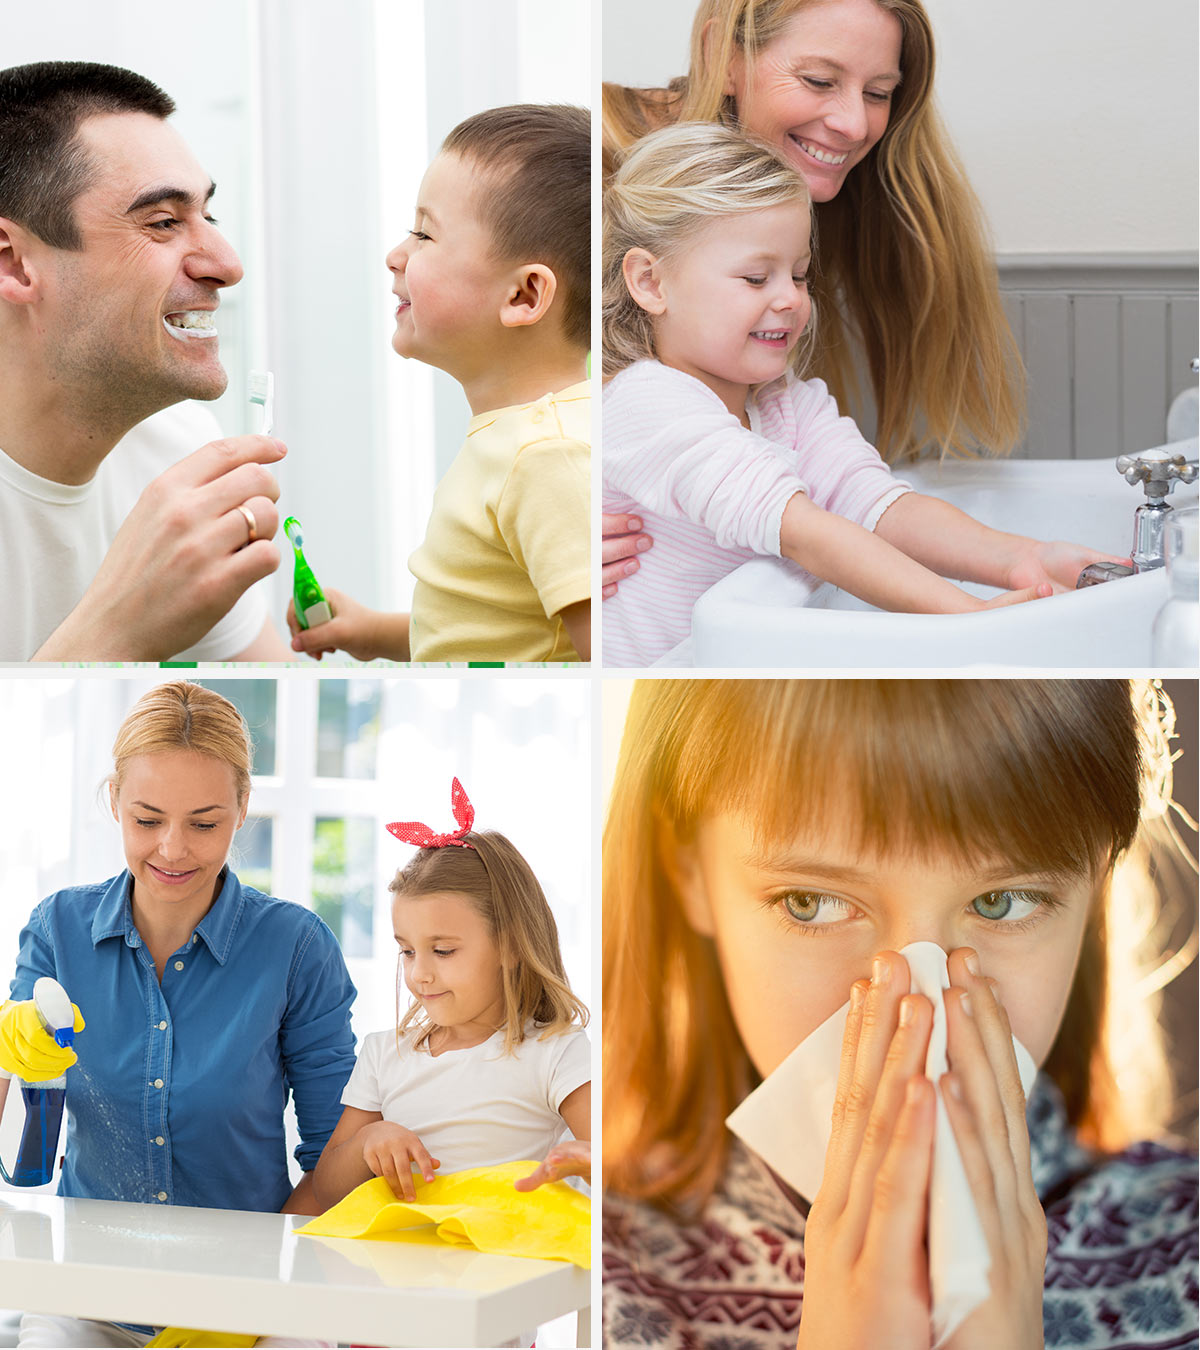 Personal Hygiene For Kids: Importance And Habits To Teach